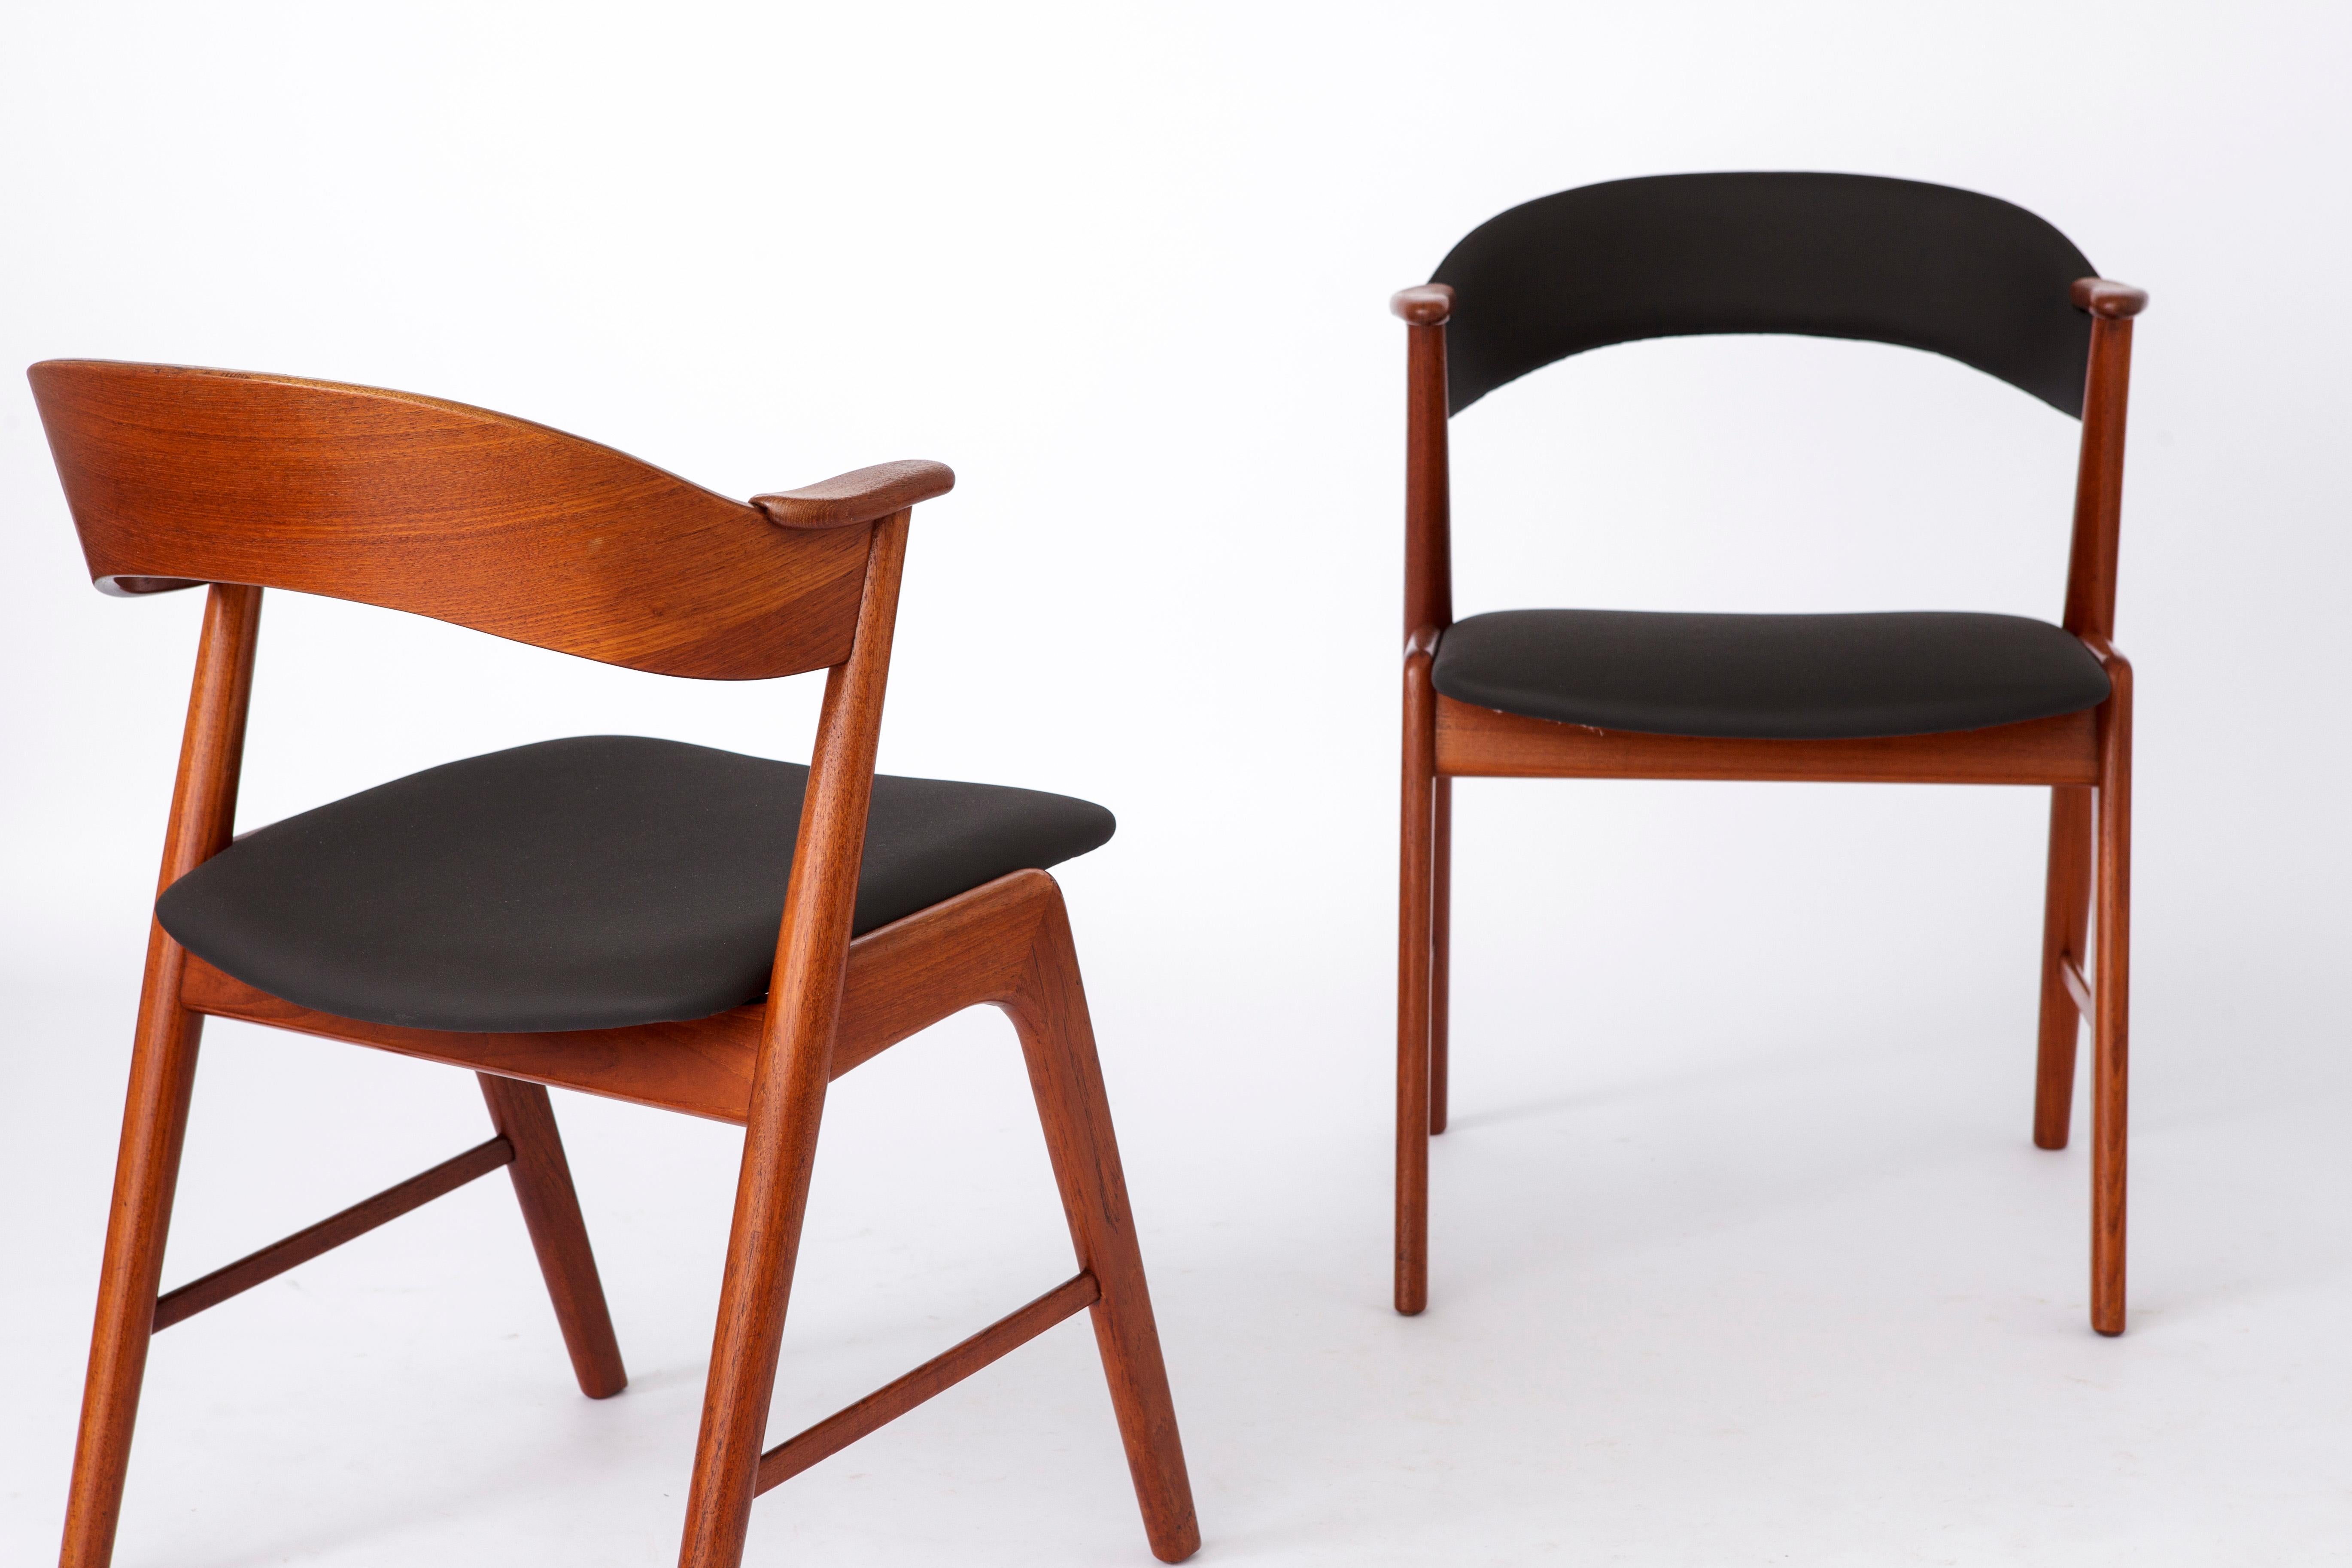 2 Vintage teak chairs designed presumably by Henry Kjaernulf for 
manufacturer Korup Stolefabrik, Denmark in the 1960s. 
Ideal as desk or dining chair!
Displayed price is for 2 chairs. 

Sturdy teak chair frame. Refurbished and oiled. 
The seats